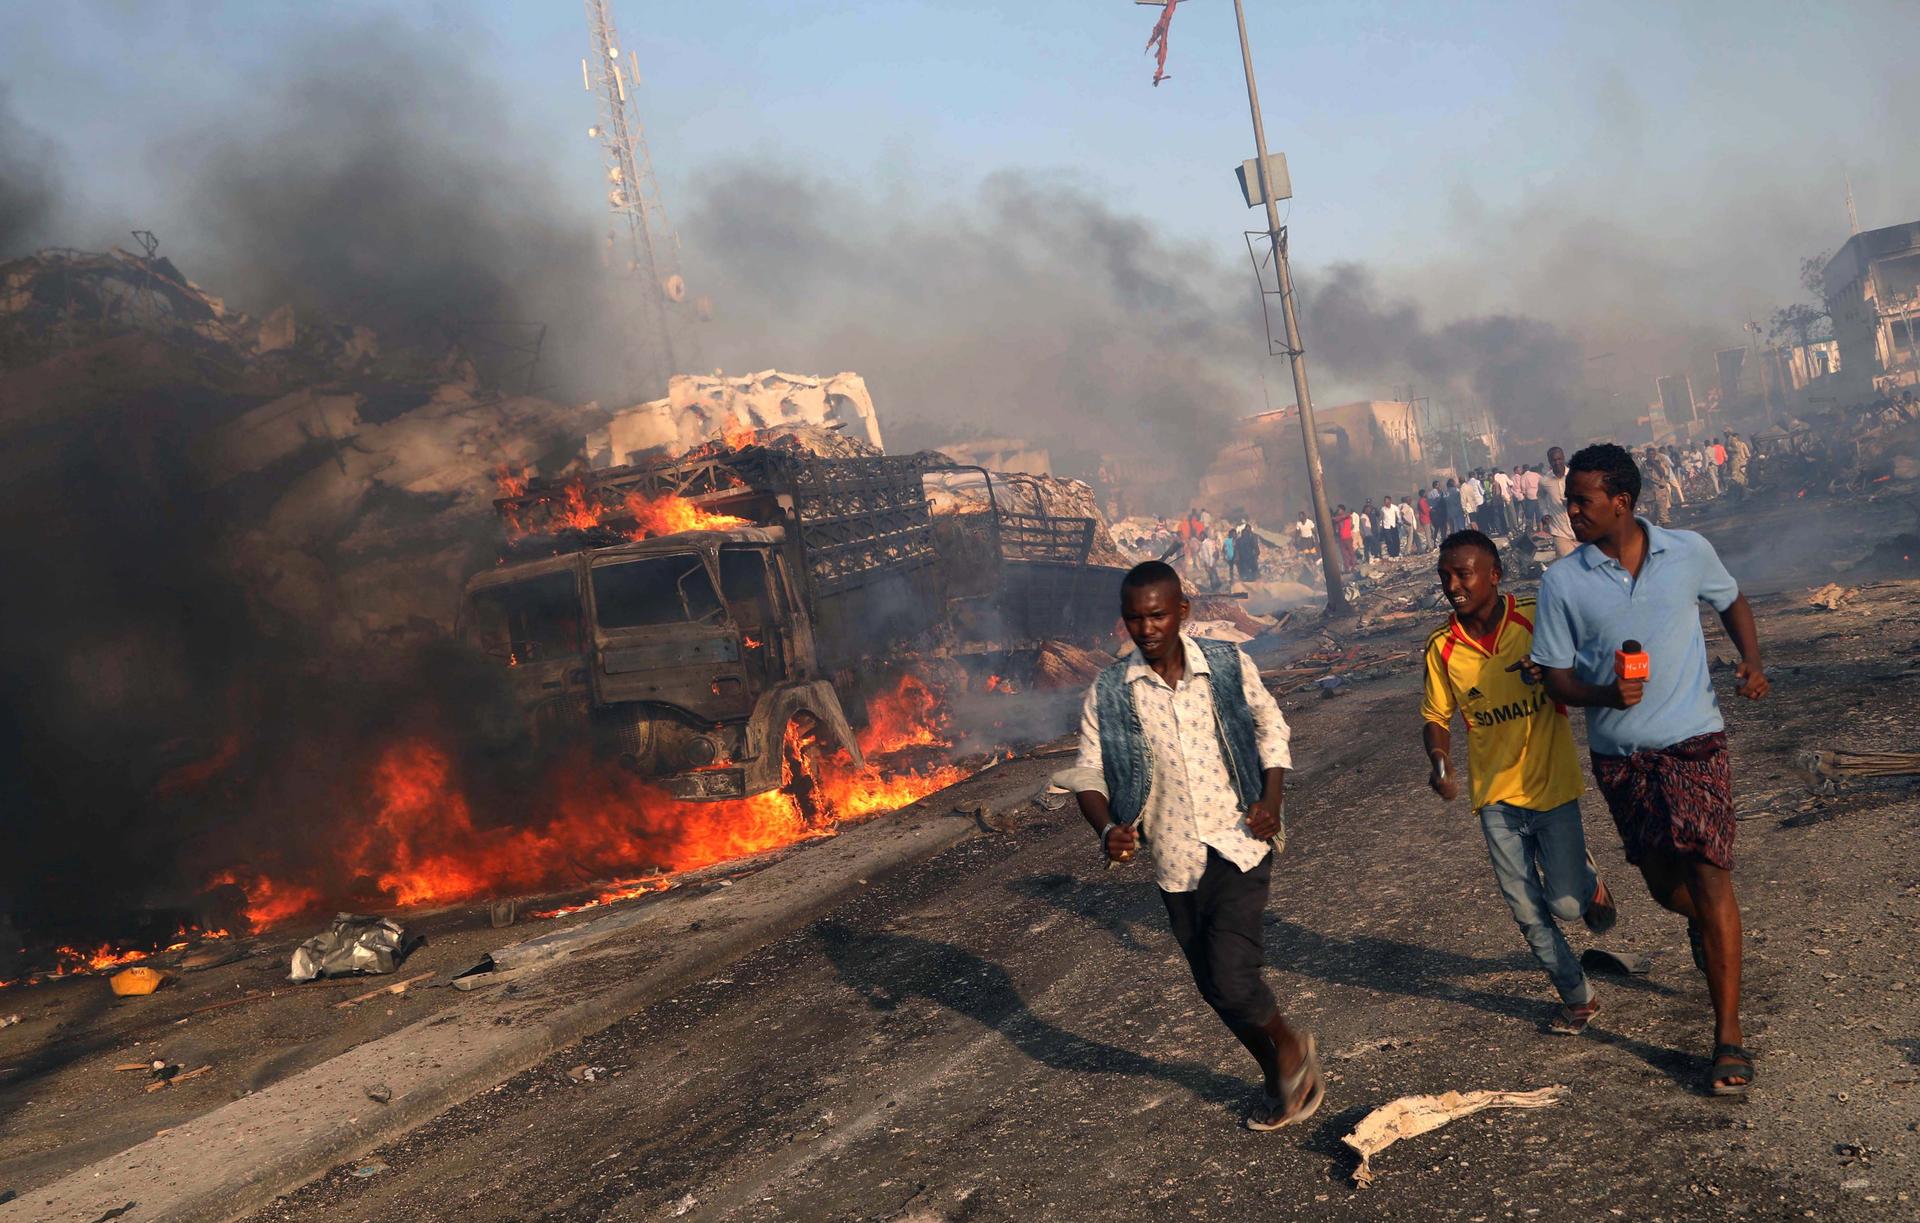 People are running from the scene of an explosion in the Hodan district of Mogadishu, Somalia, on Oct. 14, 2017.